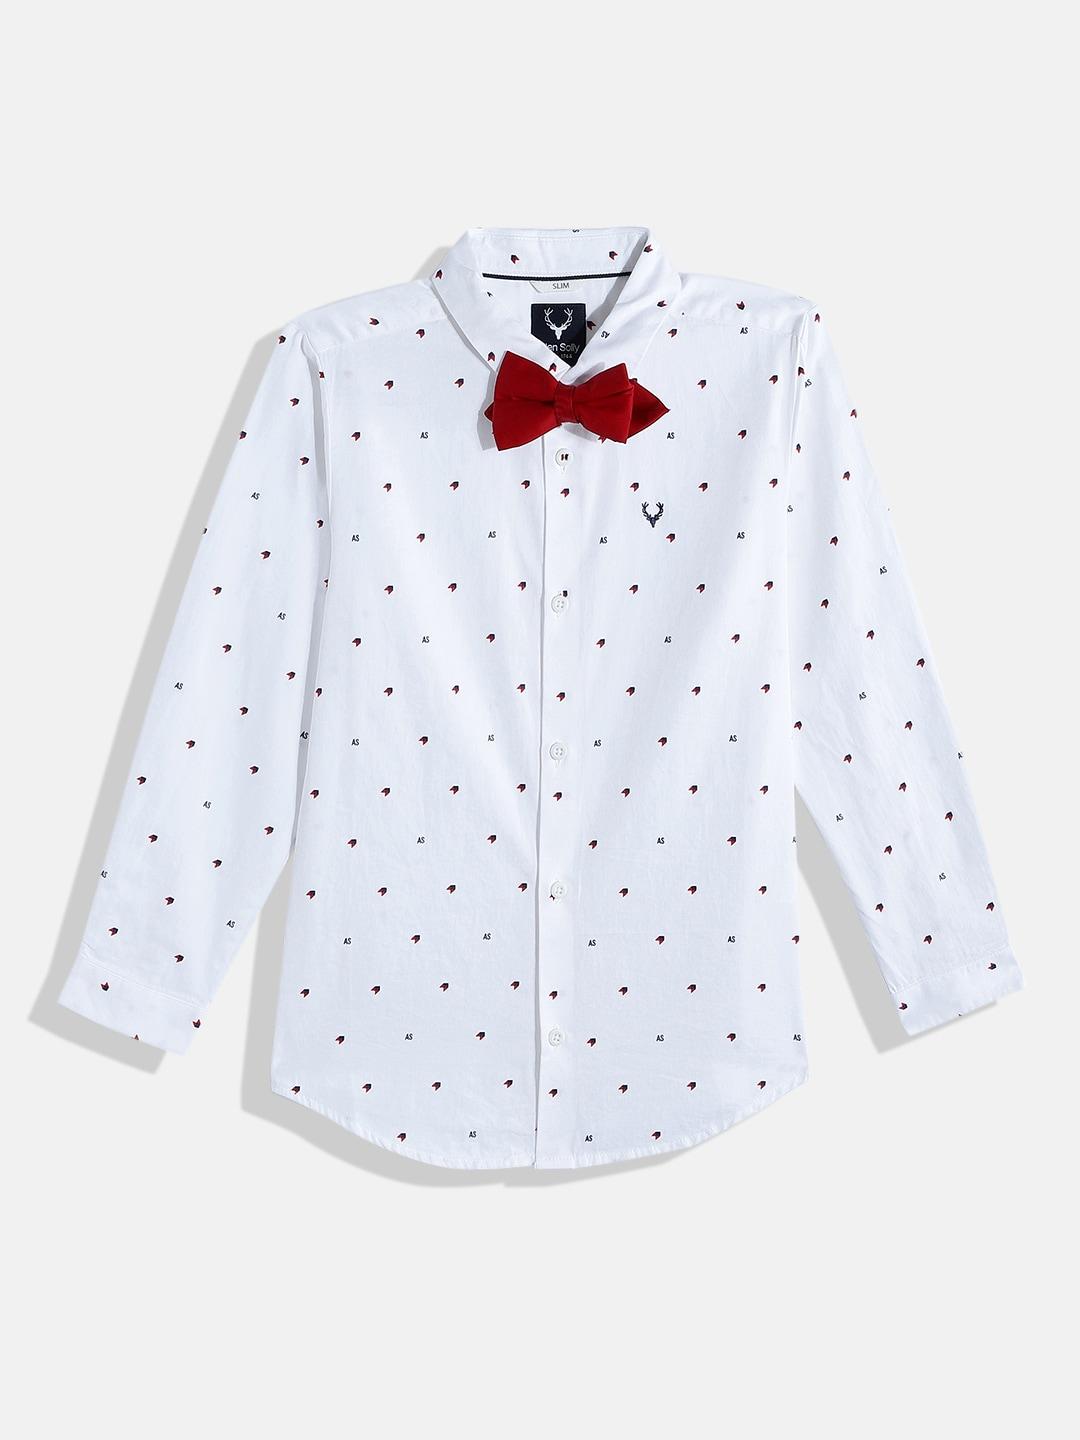 allen solly junior boys brand logo printed pure cotton casual shirt with a bow